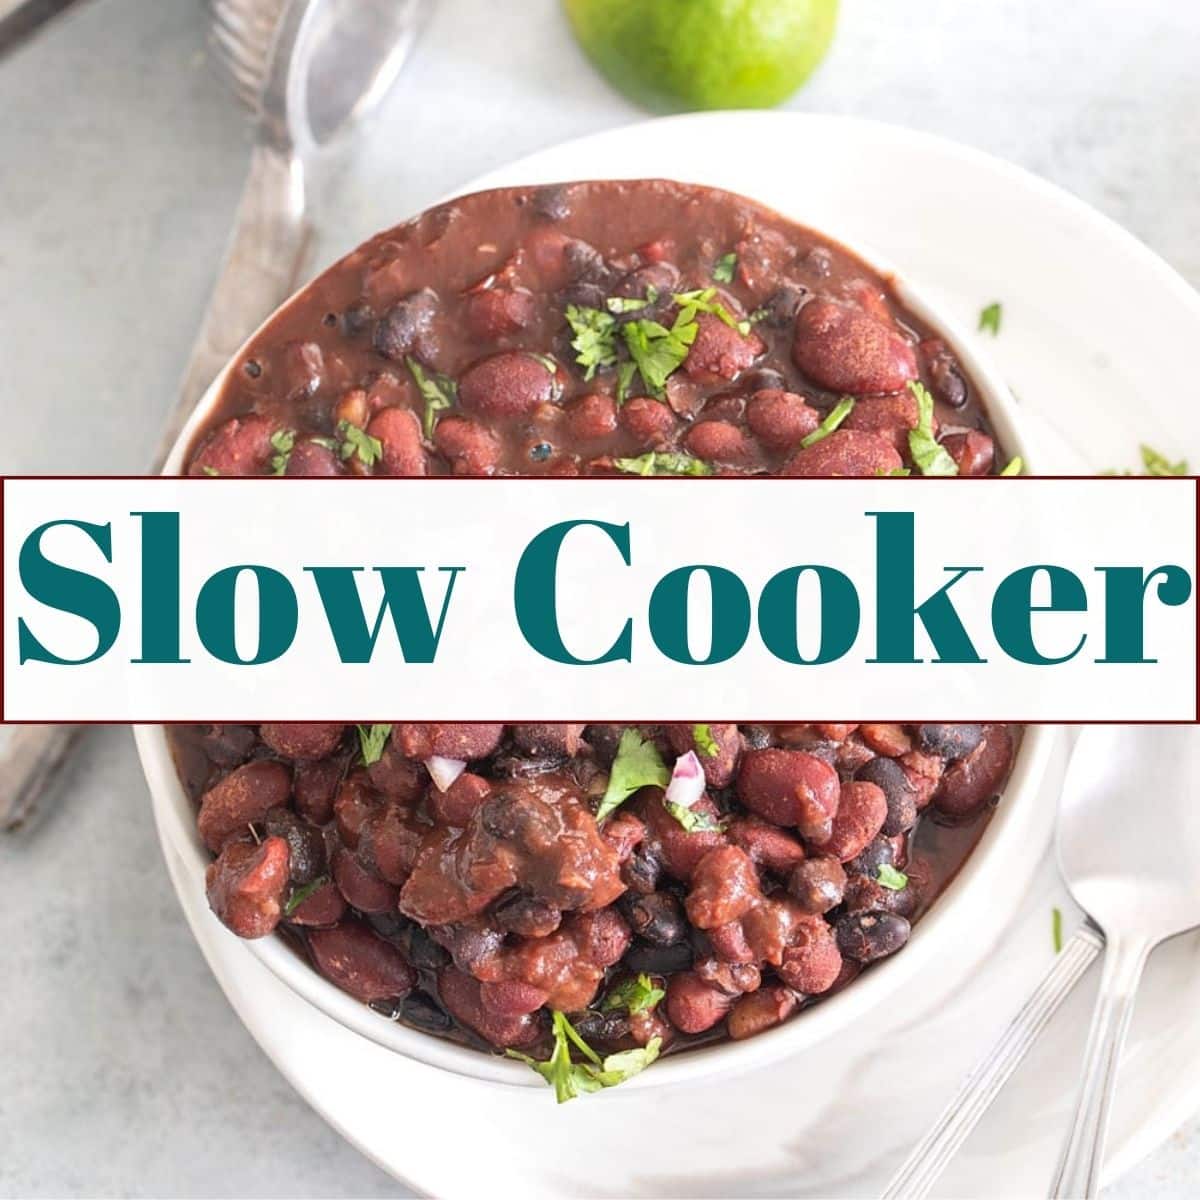 3 Bean Chili as the backdrop and then, the title of the category is "Slow Cooker"